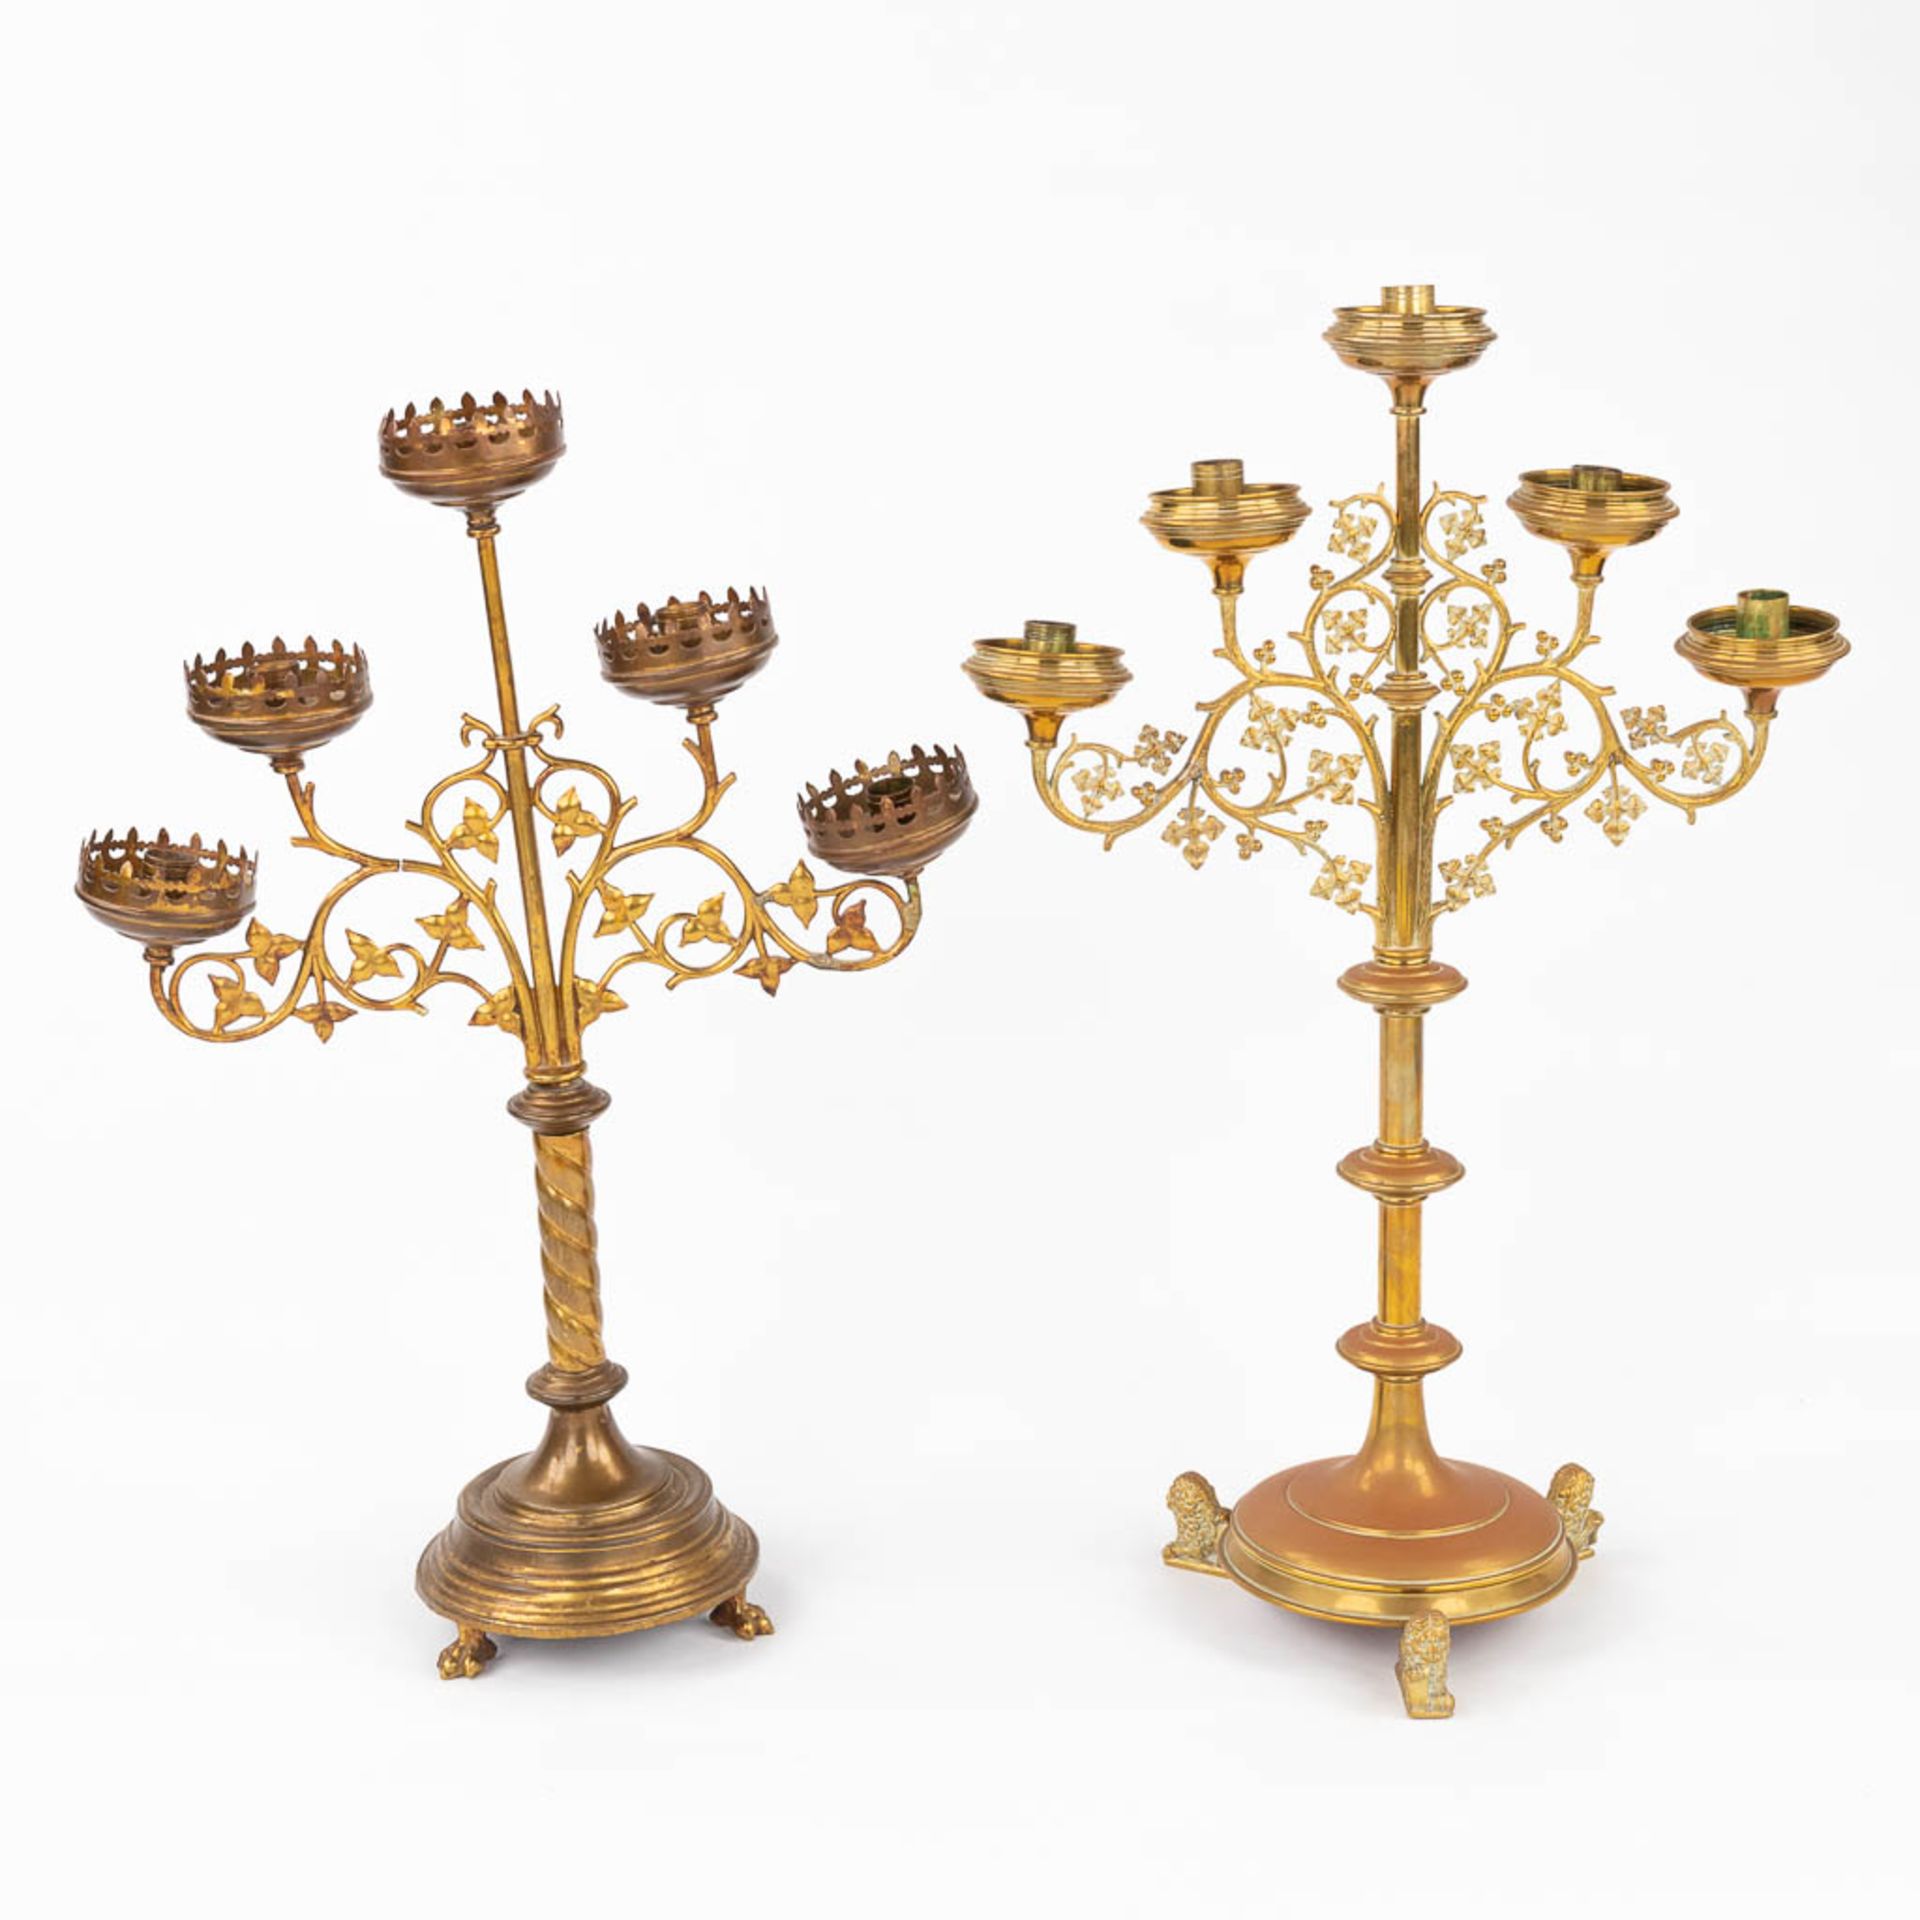 Four Church candlesticks, bronze in a gothic revival style. A pair and two singles. (D:18 x W:51 x H - Image 11 of 18